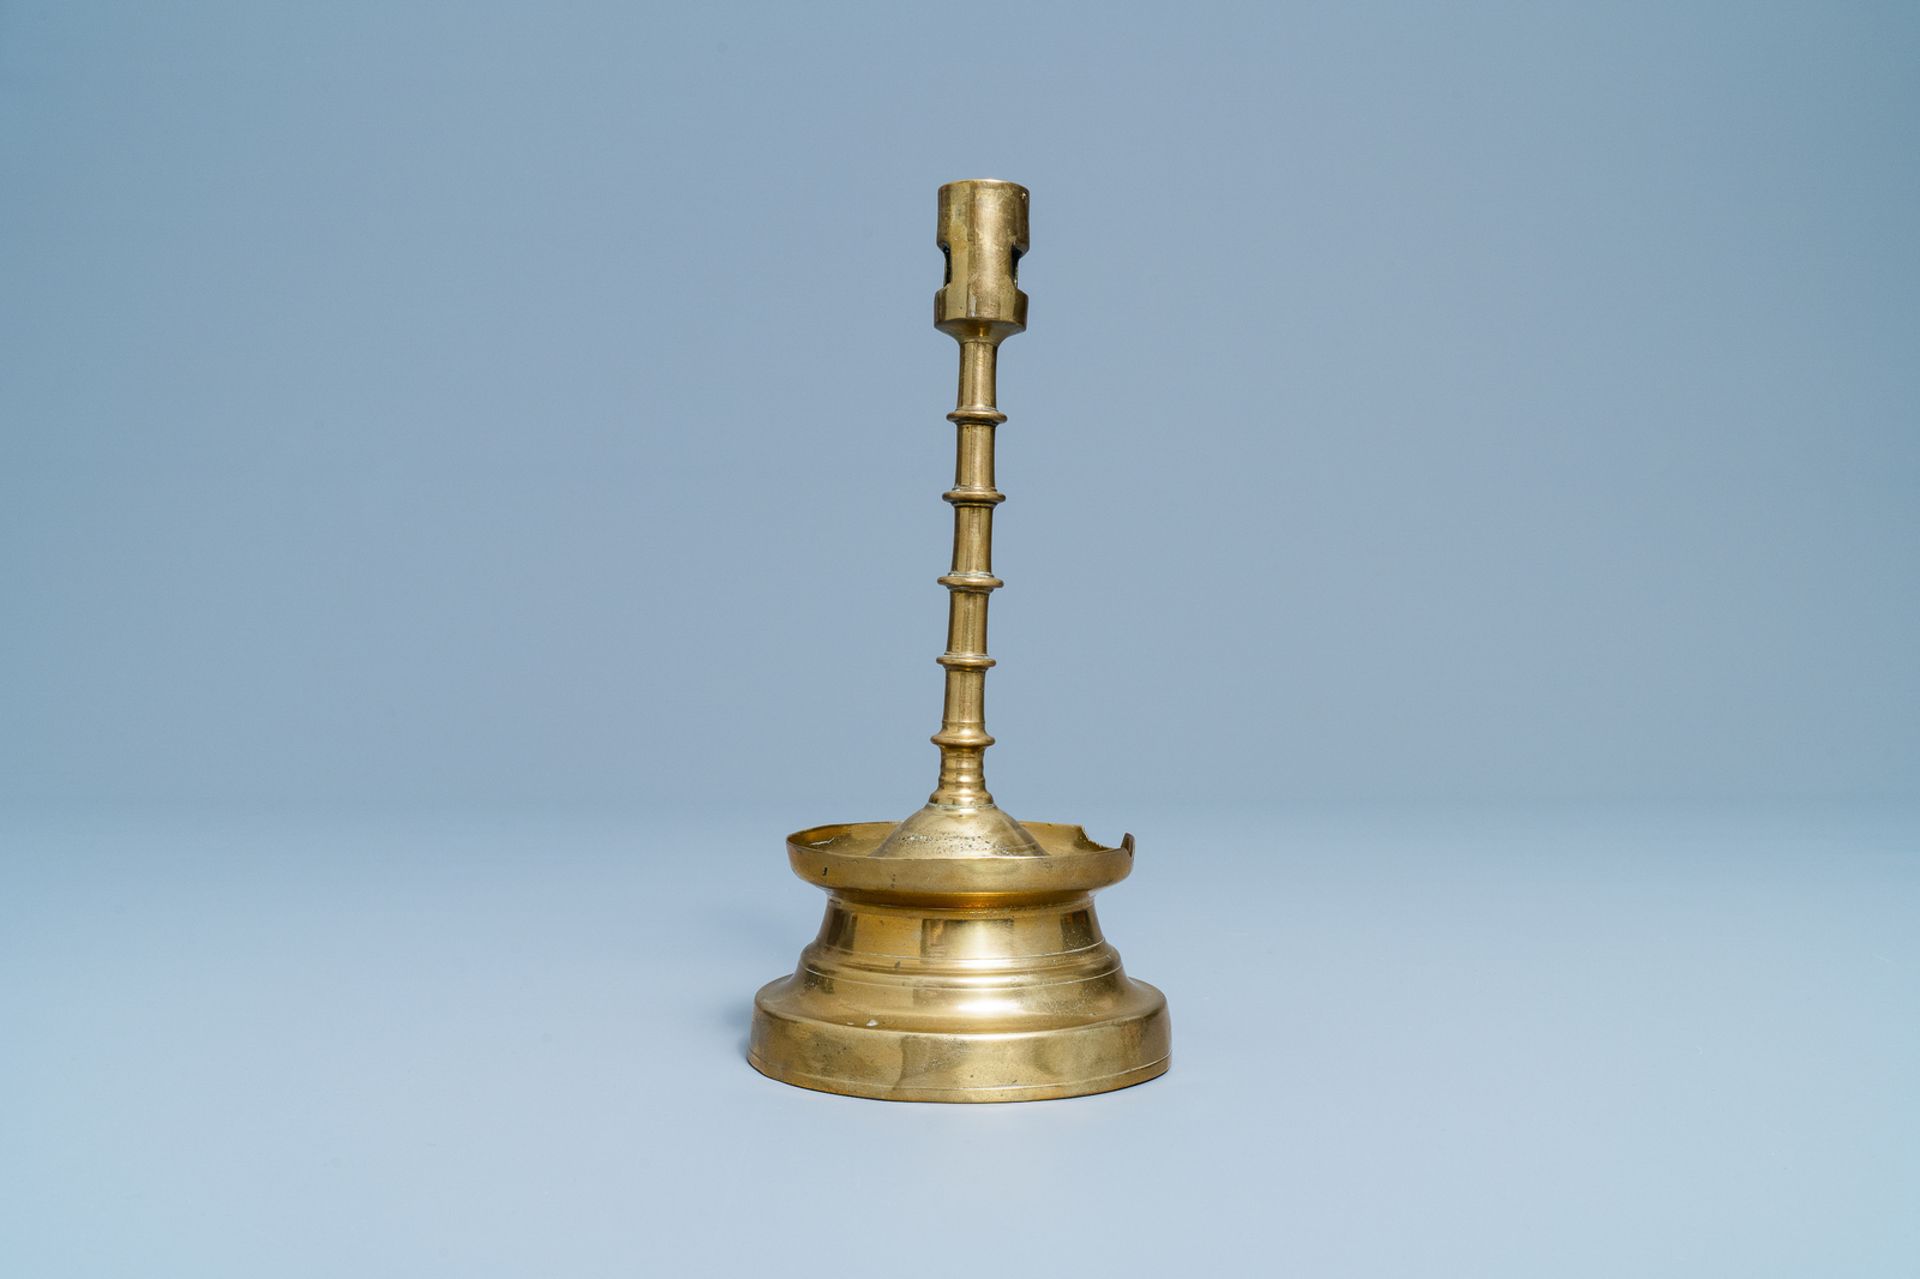 A Flemish or Dutch knotted bronze candlestick, 15th C. - Image 4 of 6